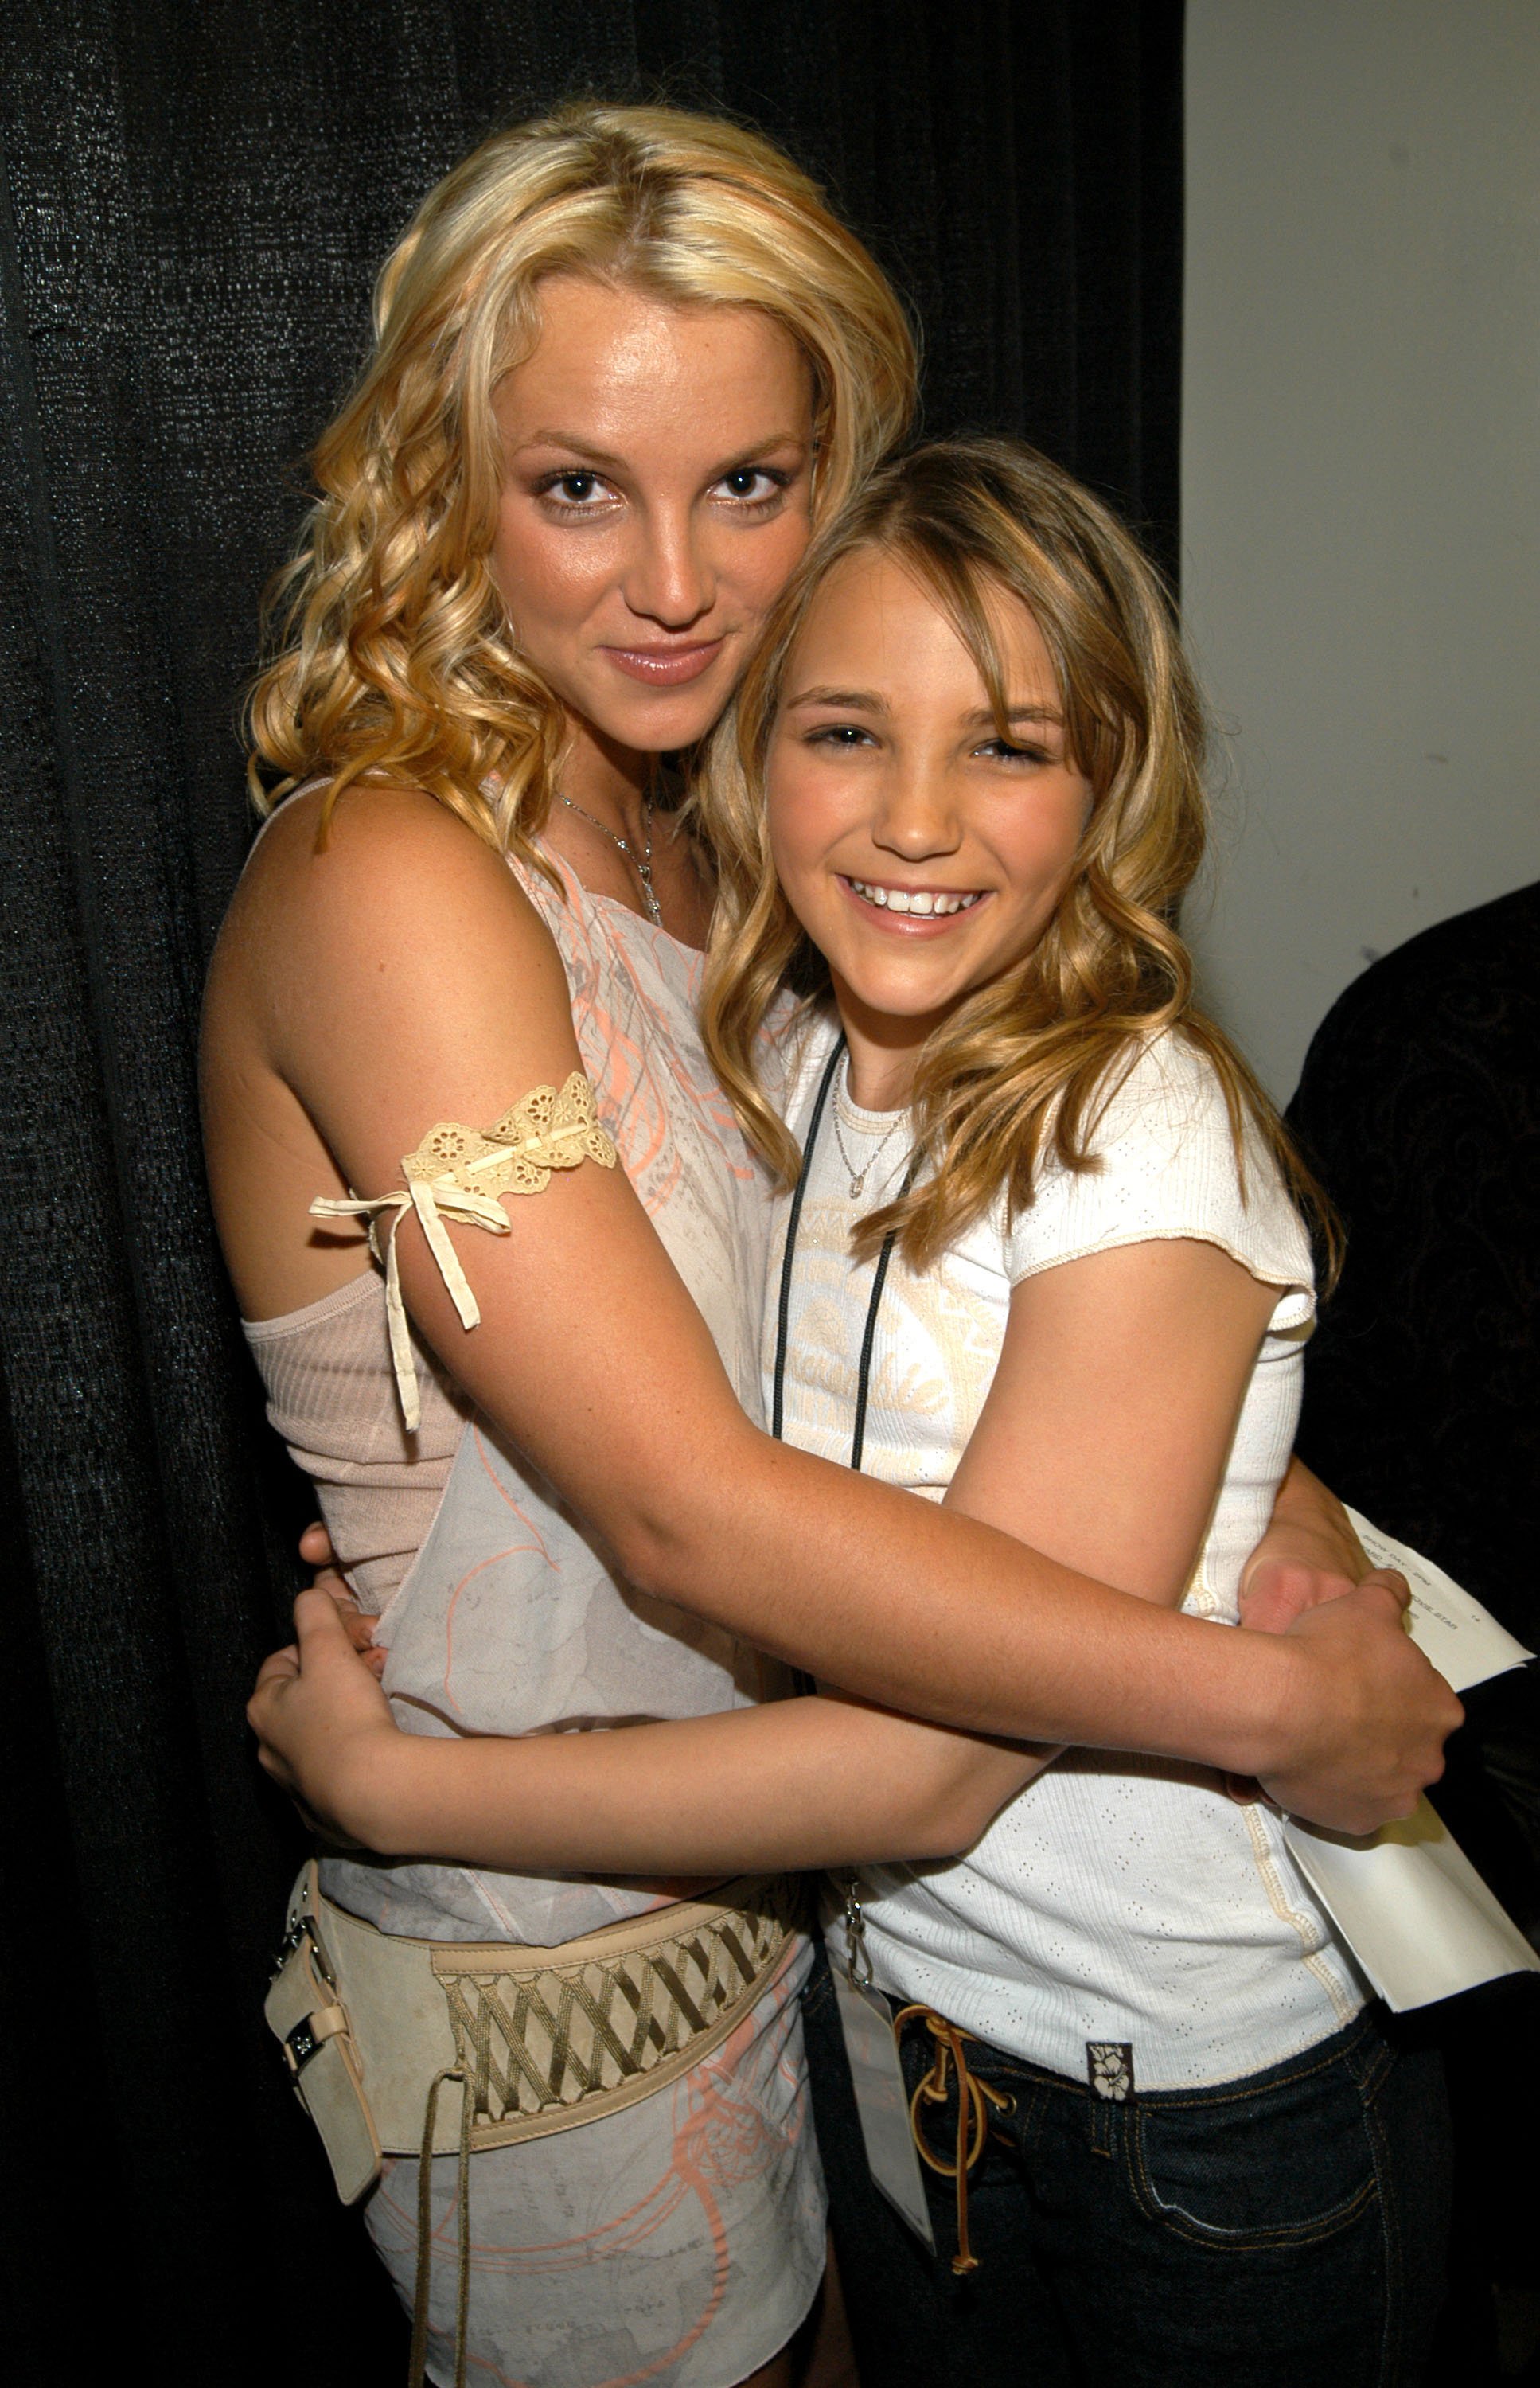  Britney Spears and Jamie Lynn Spears at the Nickelodeon Kids Choice Awards 2003 | Photo: Getty Images